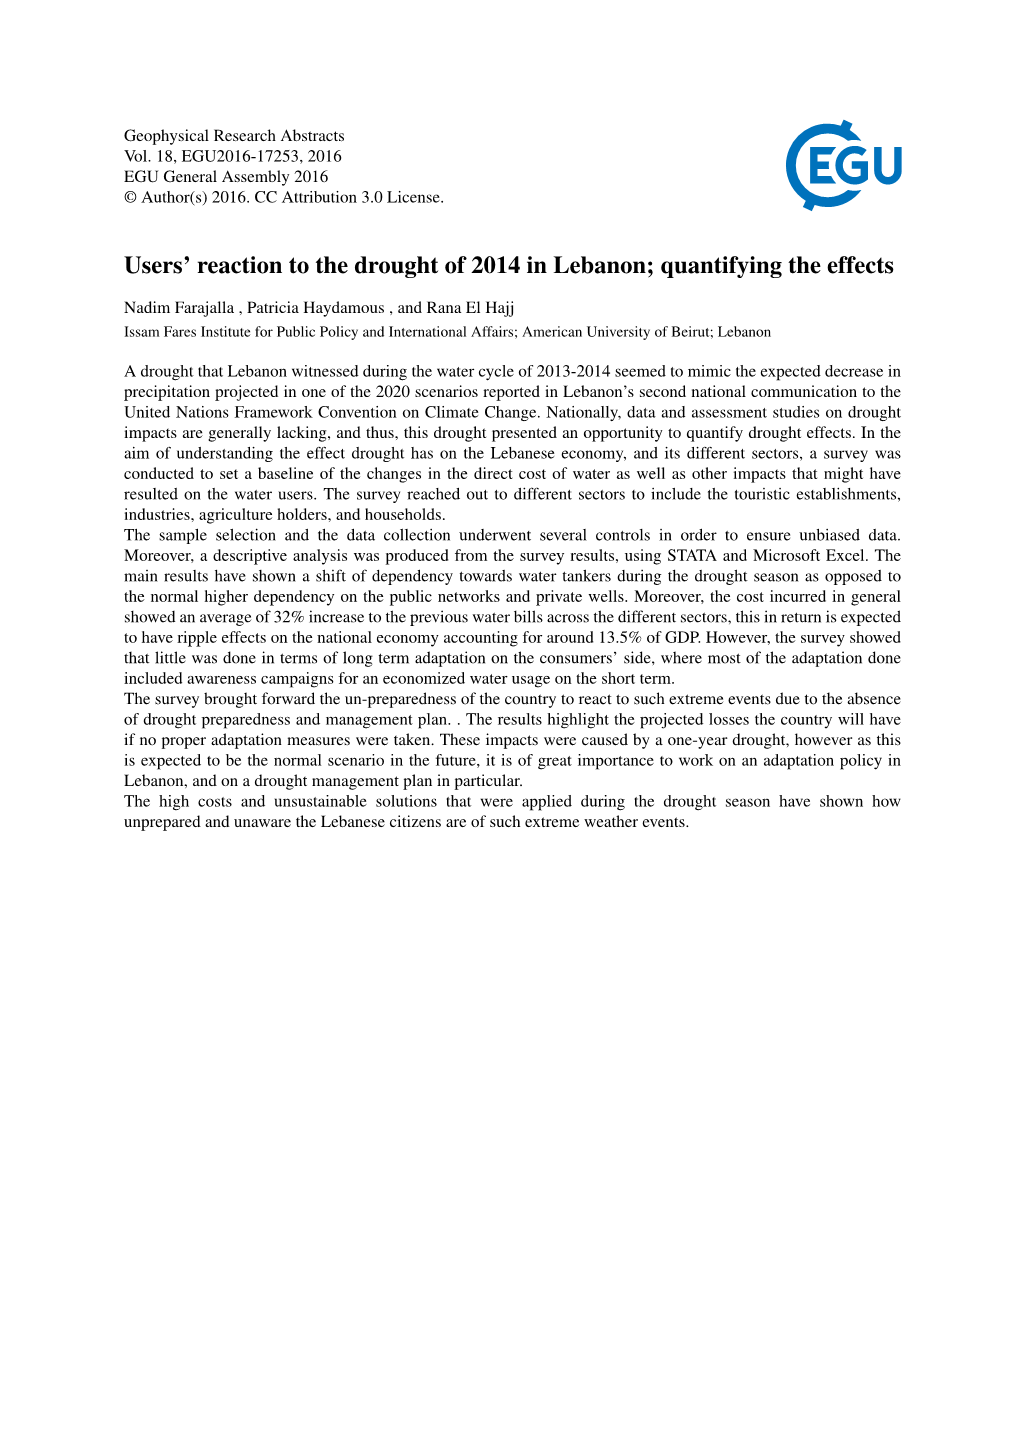 Users' Reaction to the Drought of 2014 in Lebanon; Quantifying the Effects